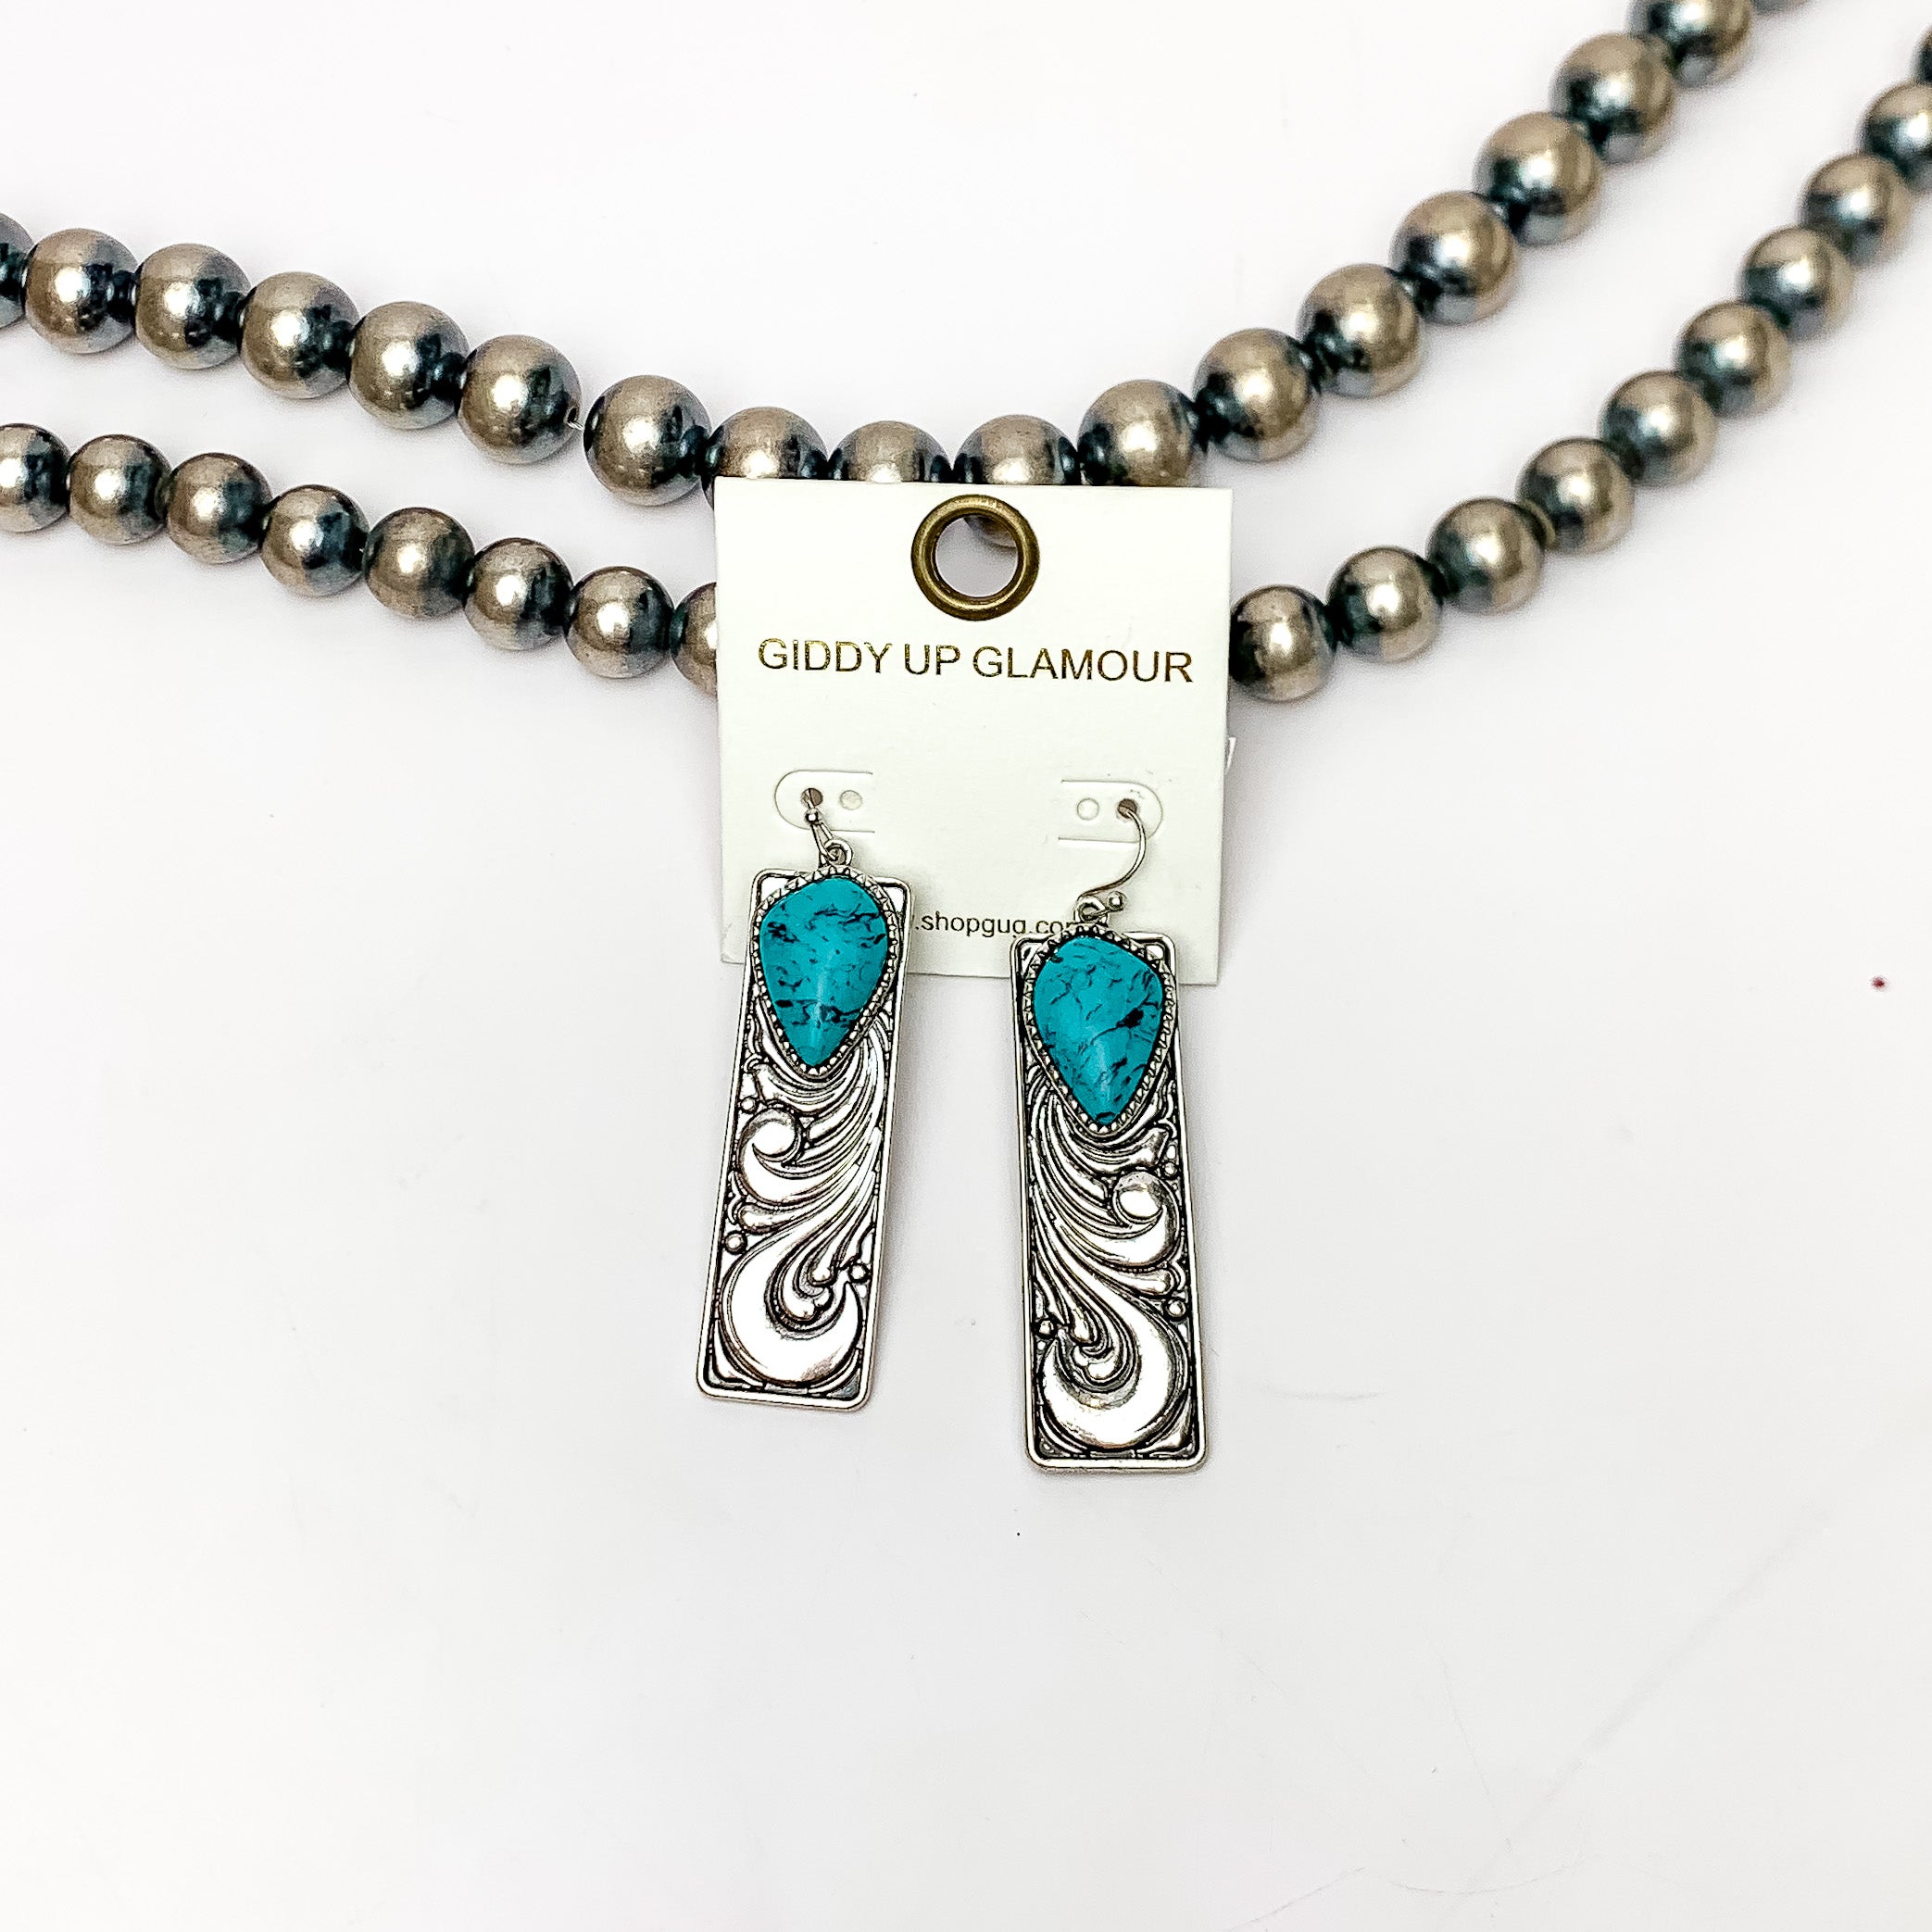 Western Swirl Silver tone Rectangular Earrings With Turquoise Blue Stone. Pictured on a white background with Navajo beads behind the earrings.